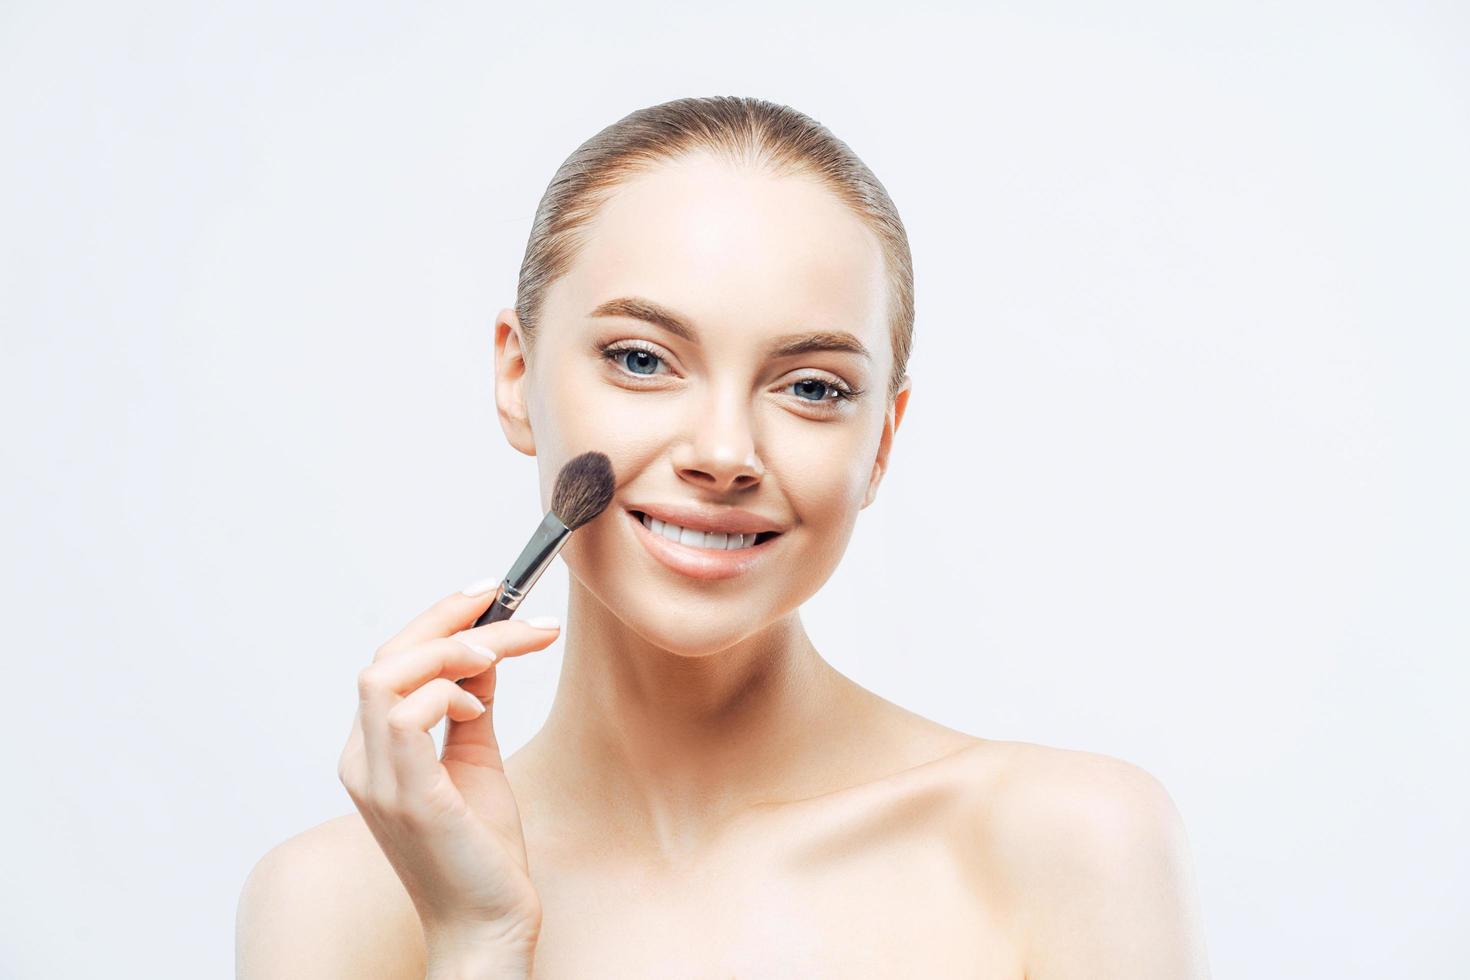 Adorable young brunette woman applies cosmetic tonal foundation with beauty brush, smiles tenderly, has healthy skin, well cared body, isolated on white background. Women, skin care, makeup concept photo